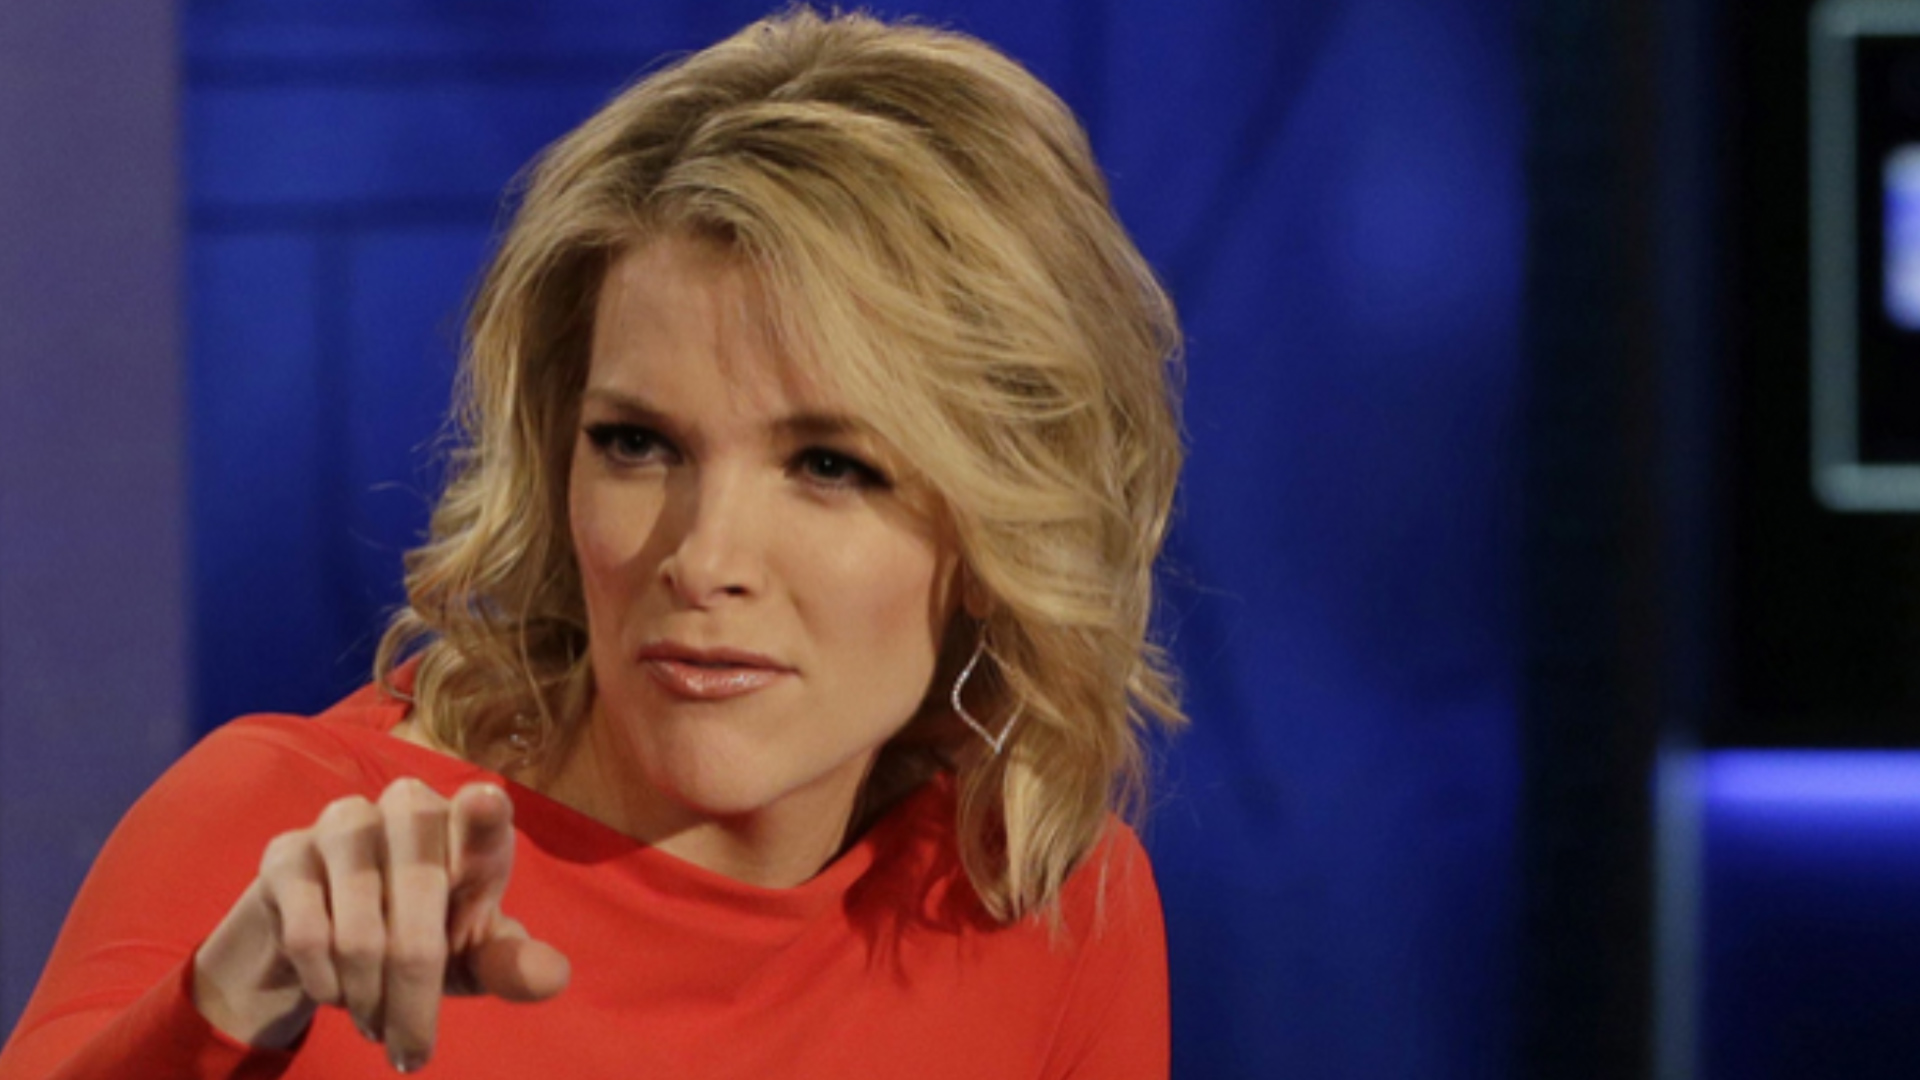 Image: Megan Kelly fired from NBC over “blackface” Halloween costume suggestion proves there is no placating the language police of the Left